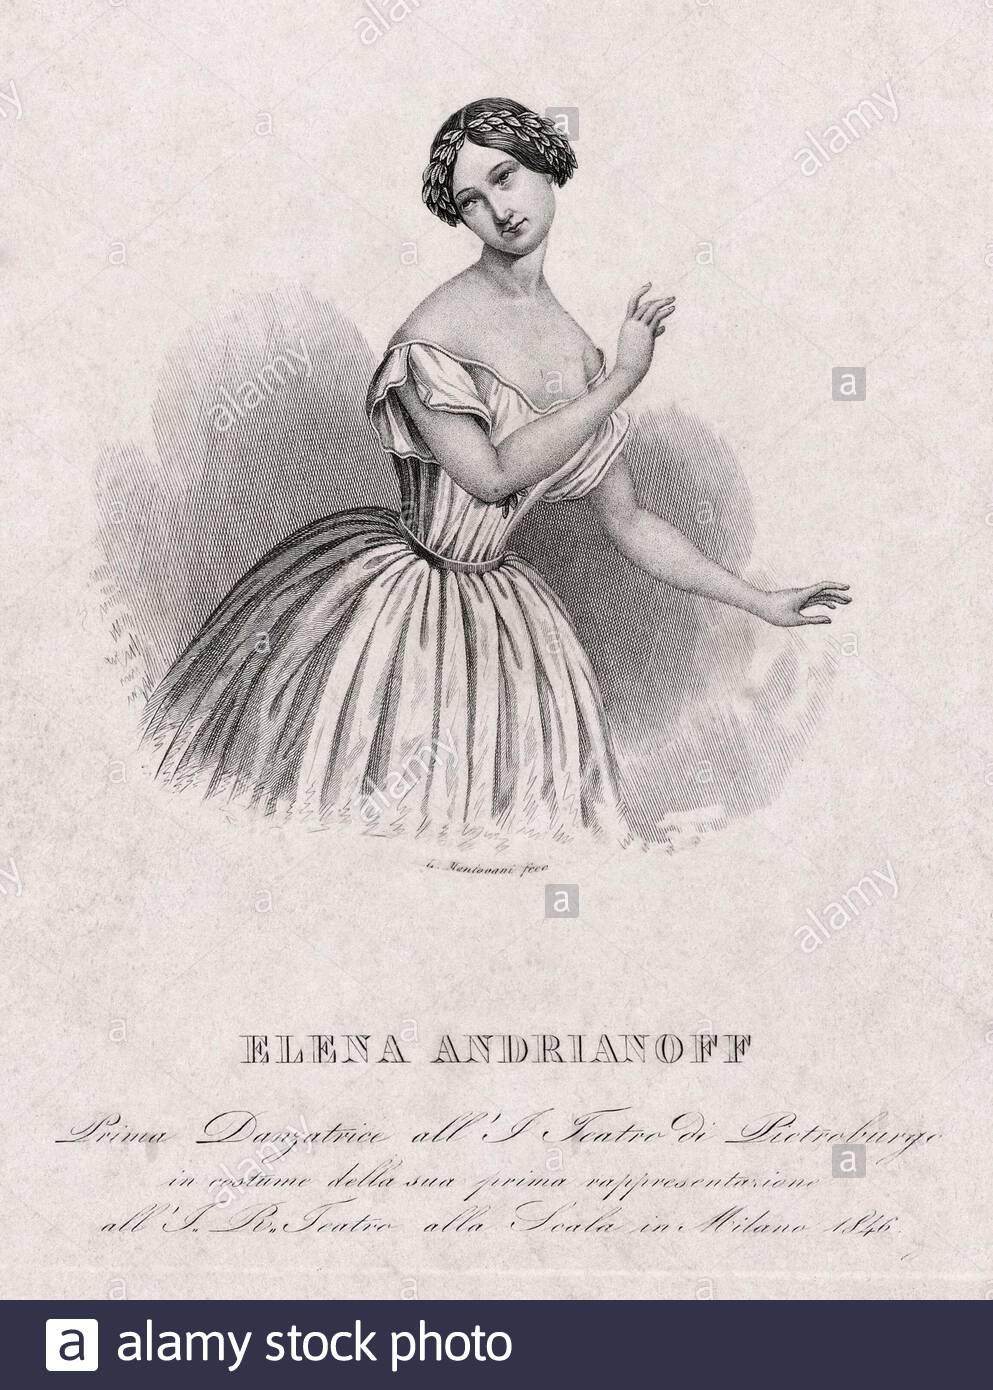 Elena Andrianoff portrait, was a Russian ballerina, vintage illustration from 1846 Stock Photo